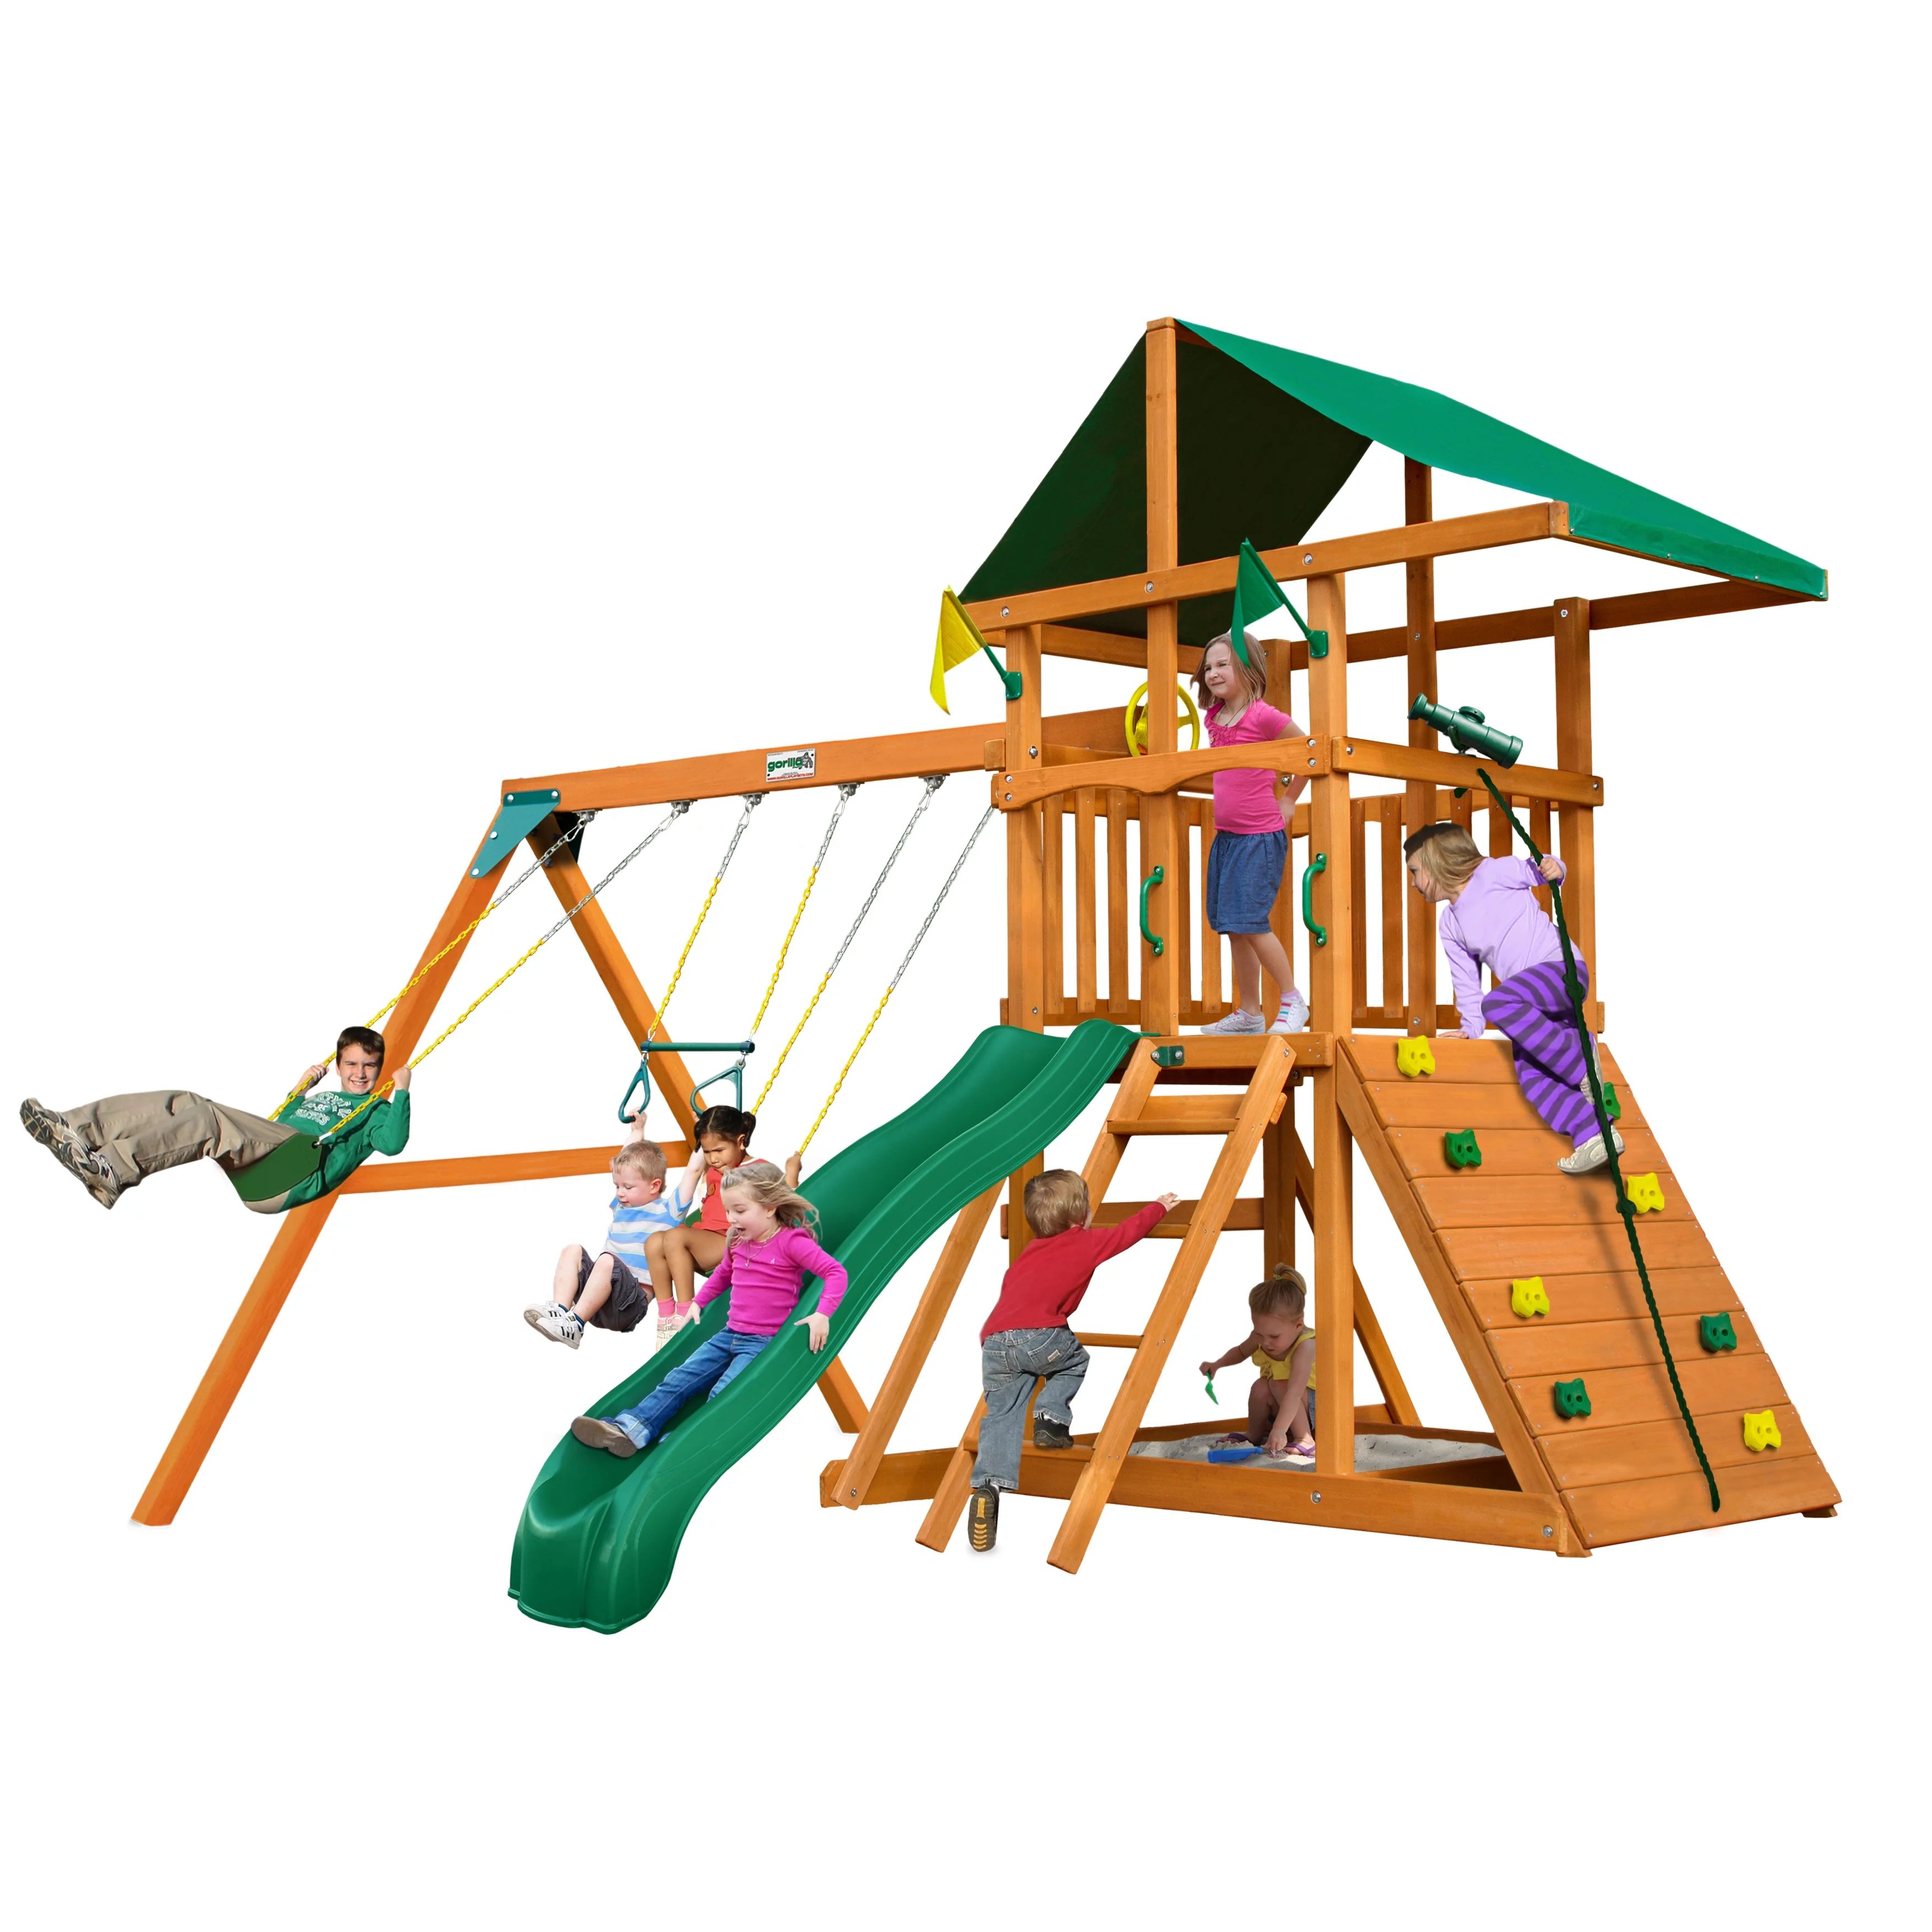 Gorilla Playsets Avalon Swing Set with Oversized Tarp Roof, Rock Wall and Slide, Amber | Walmart (US)